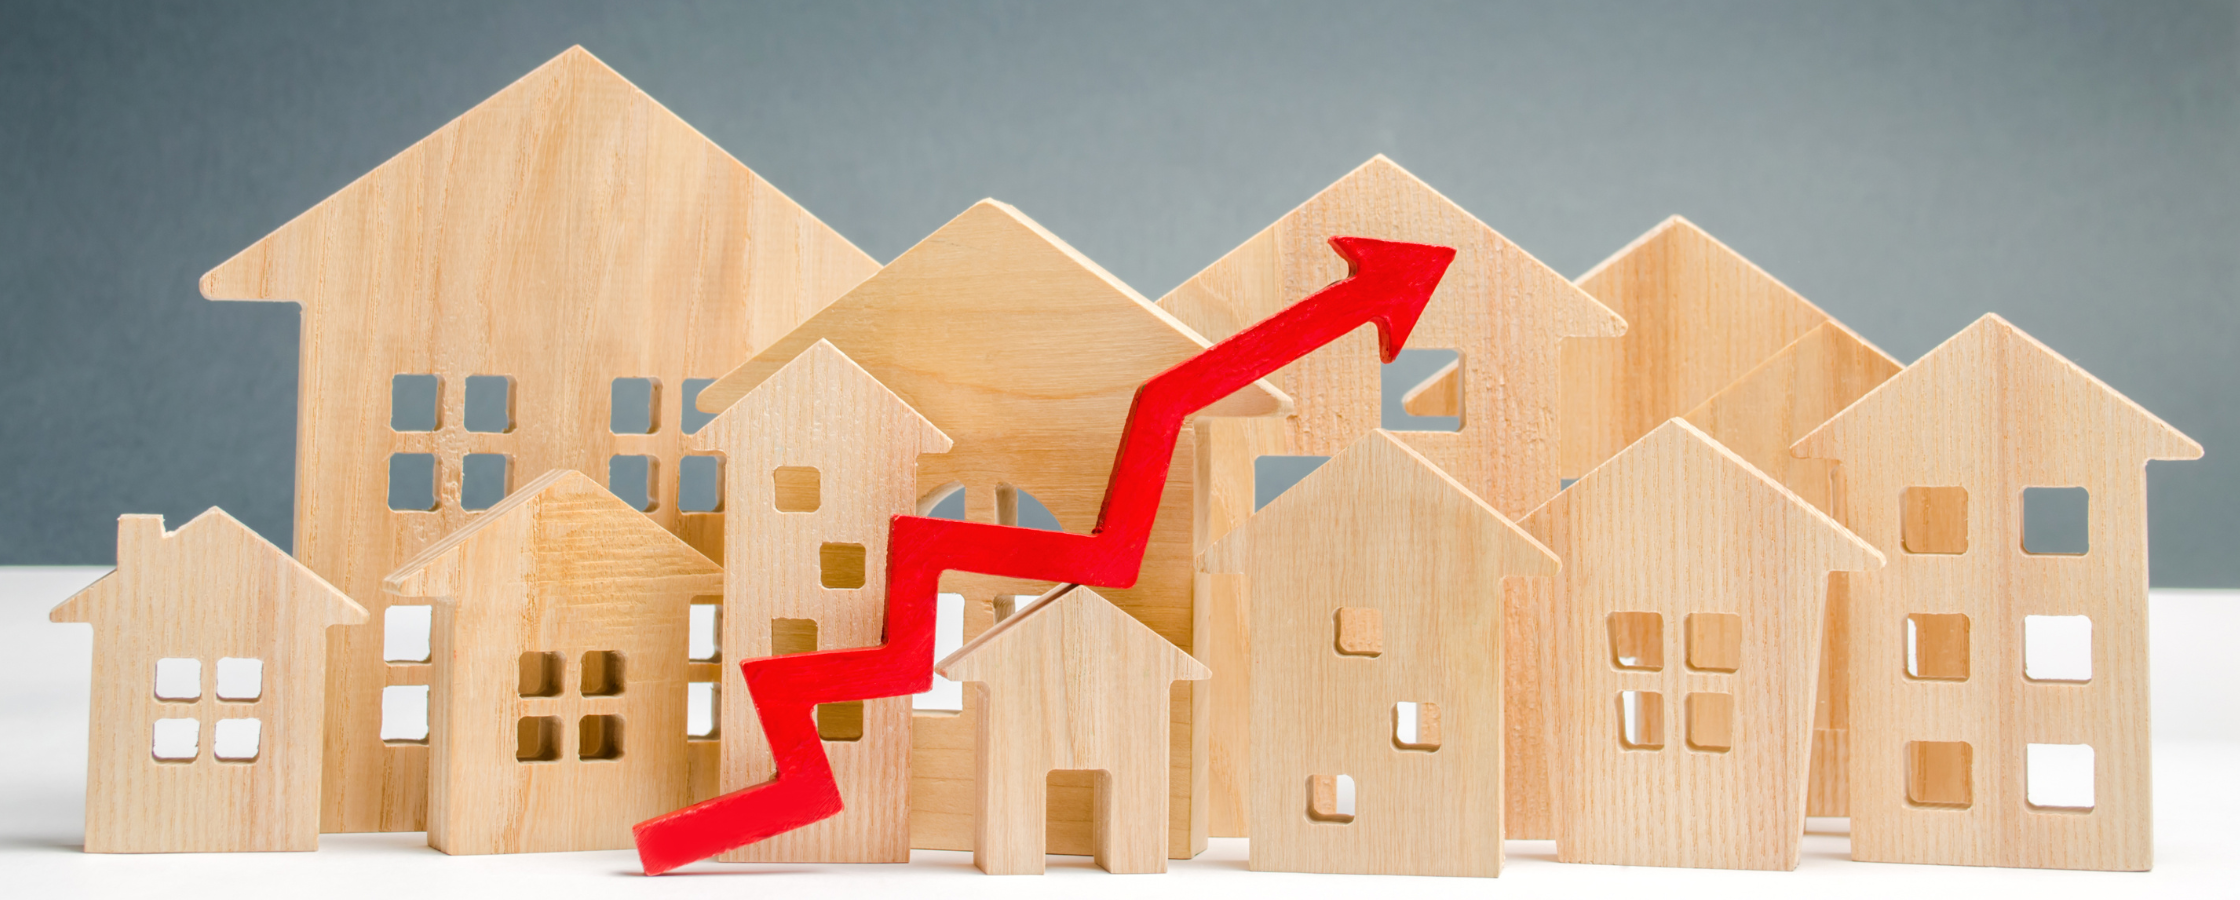 Rental demand increases due to the high interest rates on mortgages